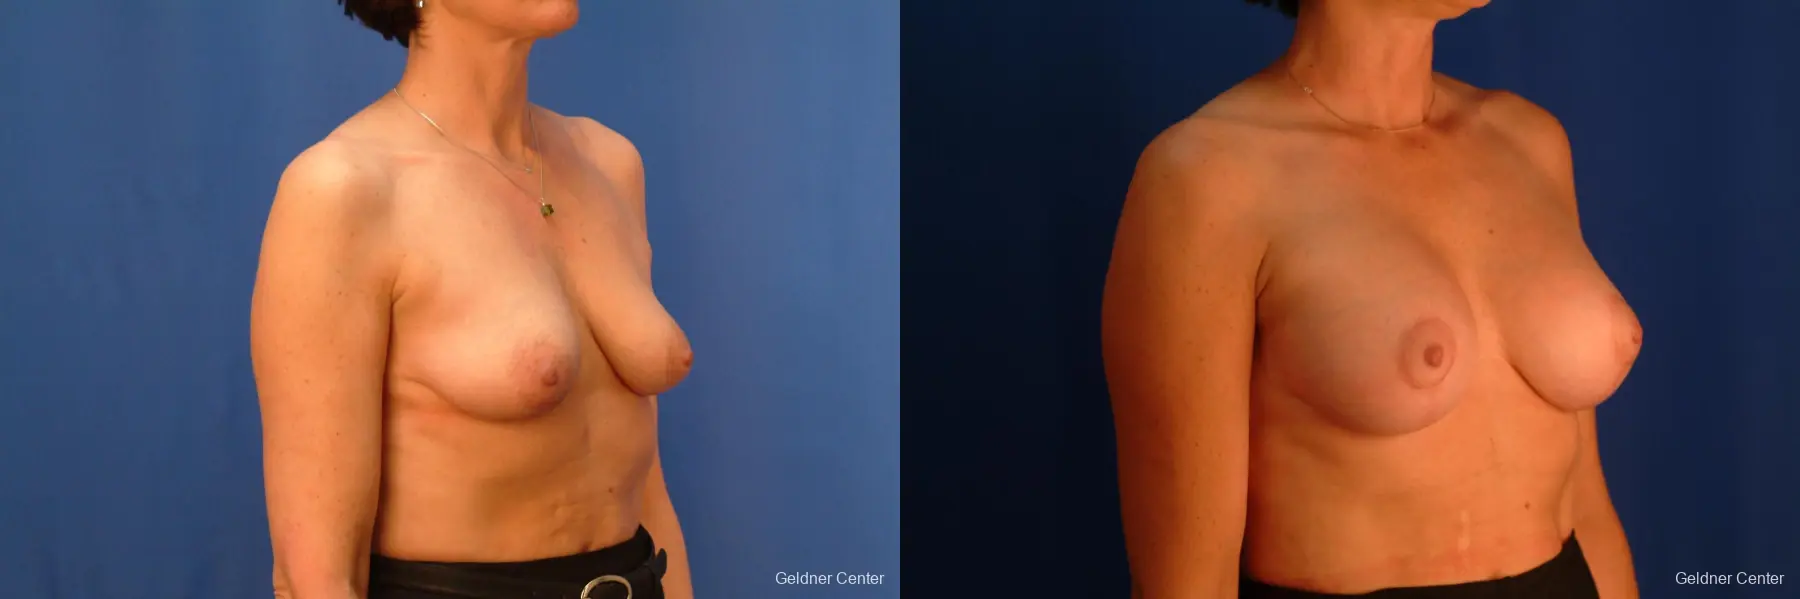 Breast Lift Hinsdale, Chicago 2509 - Before and After 3